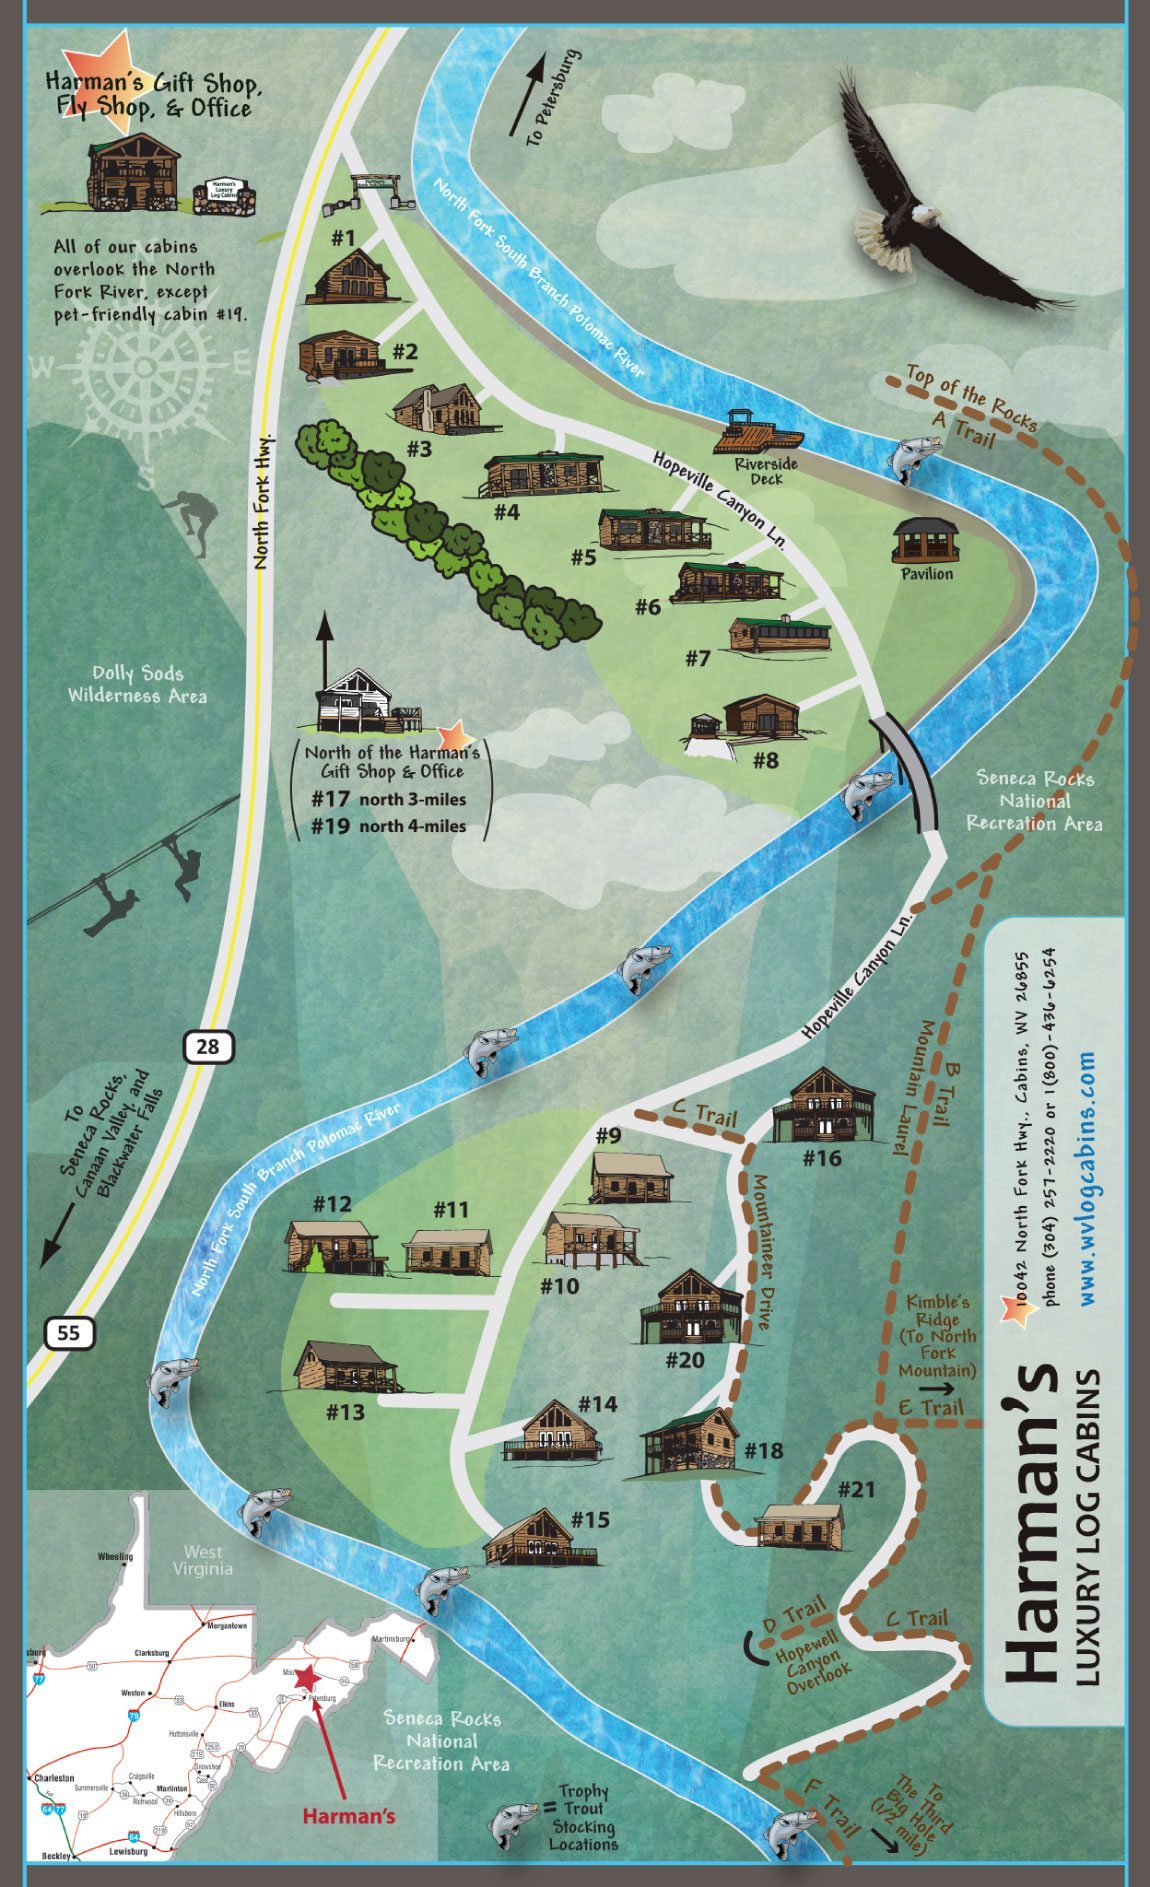 An illustrated map of Harman's property